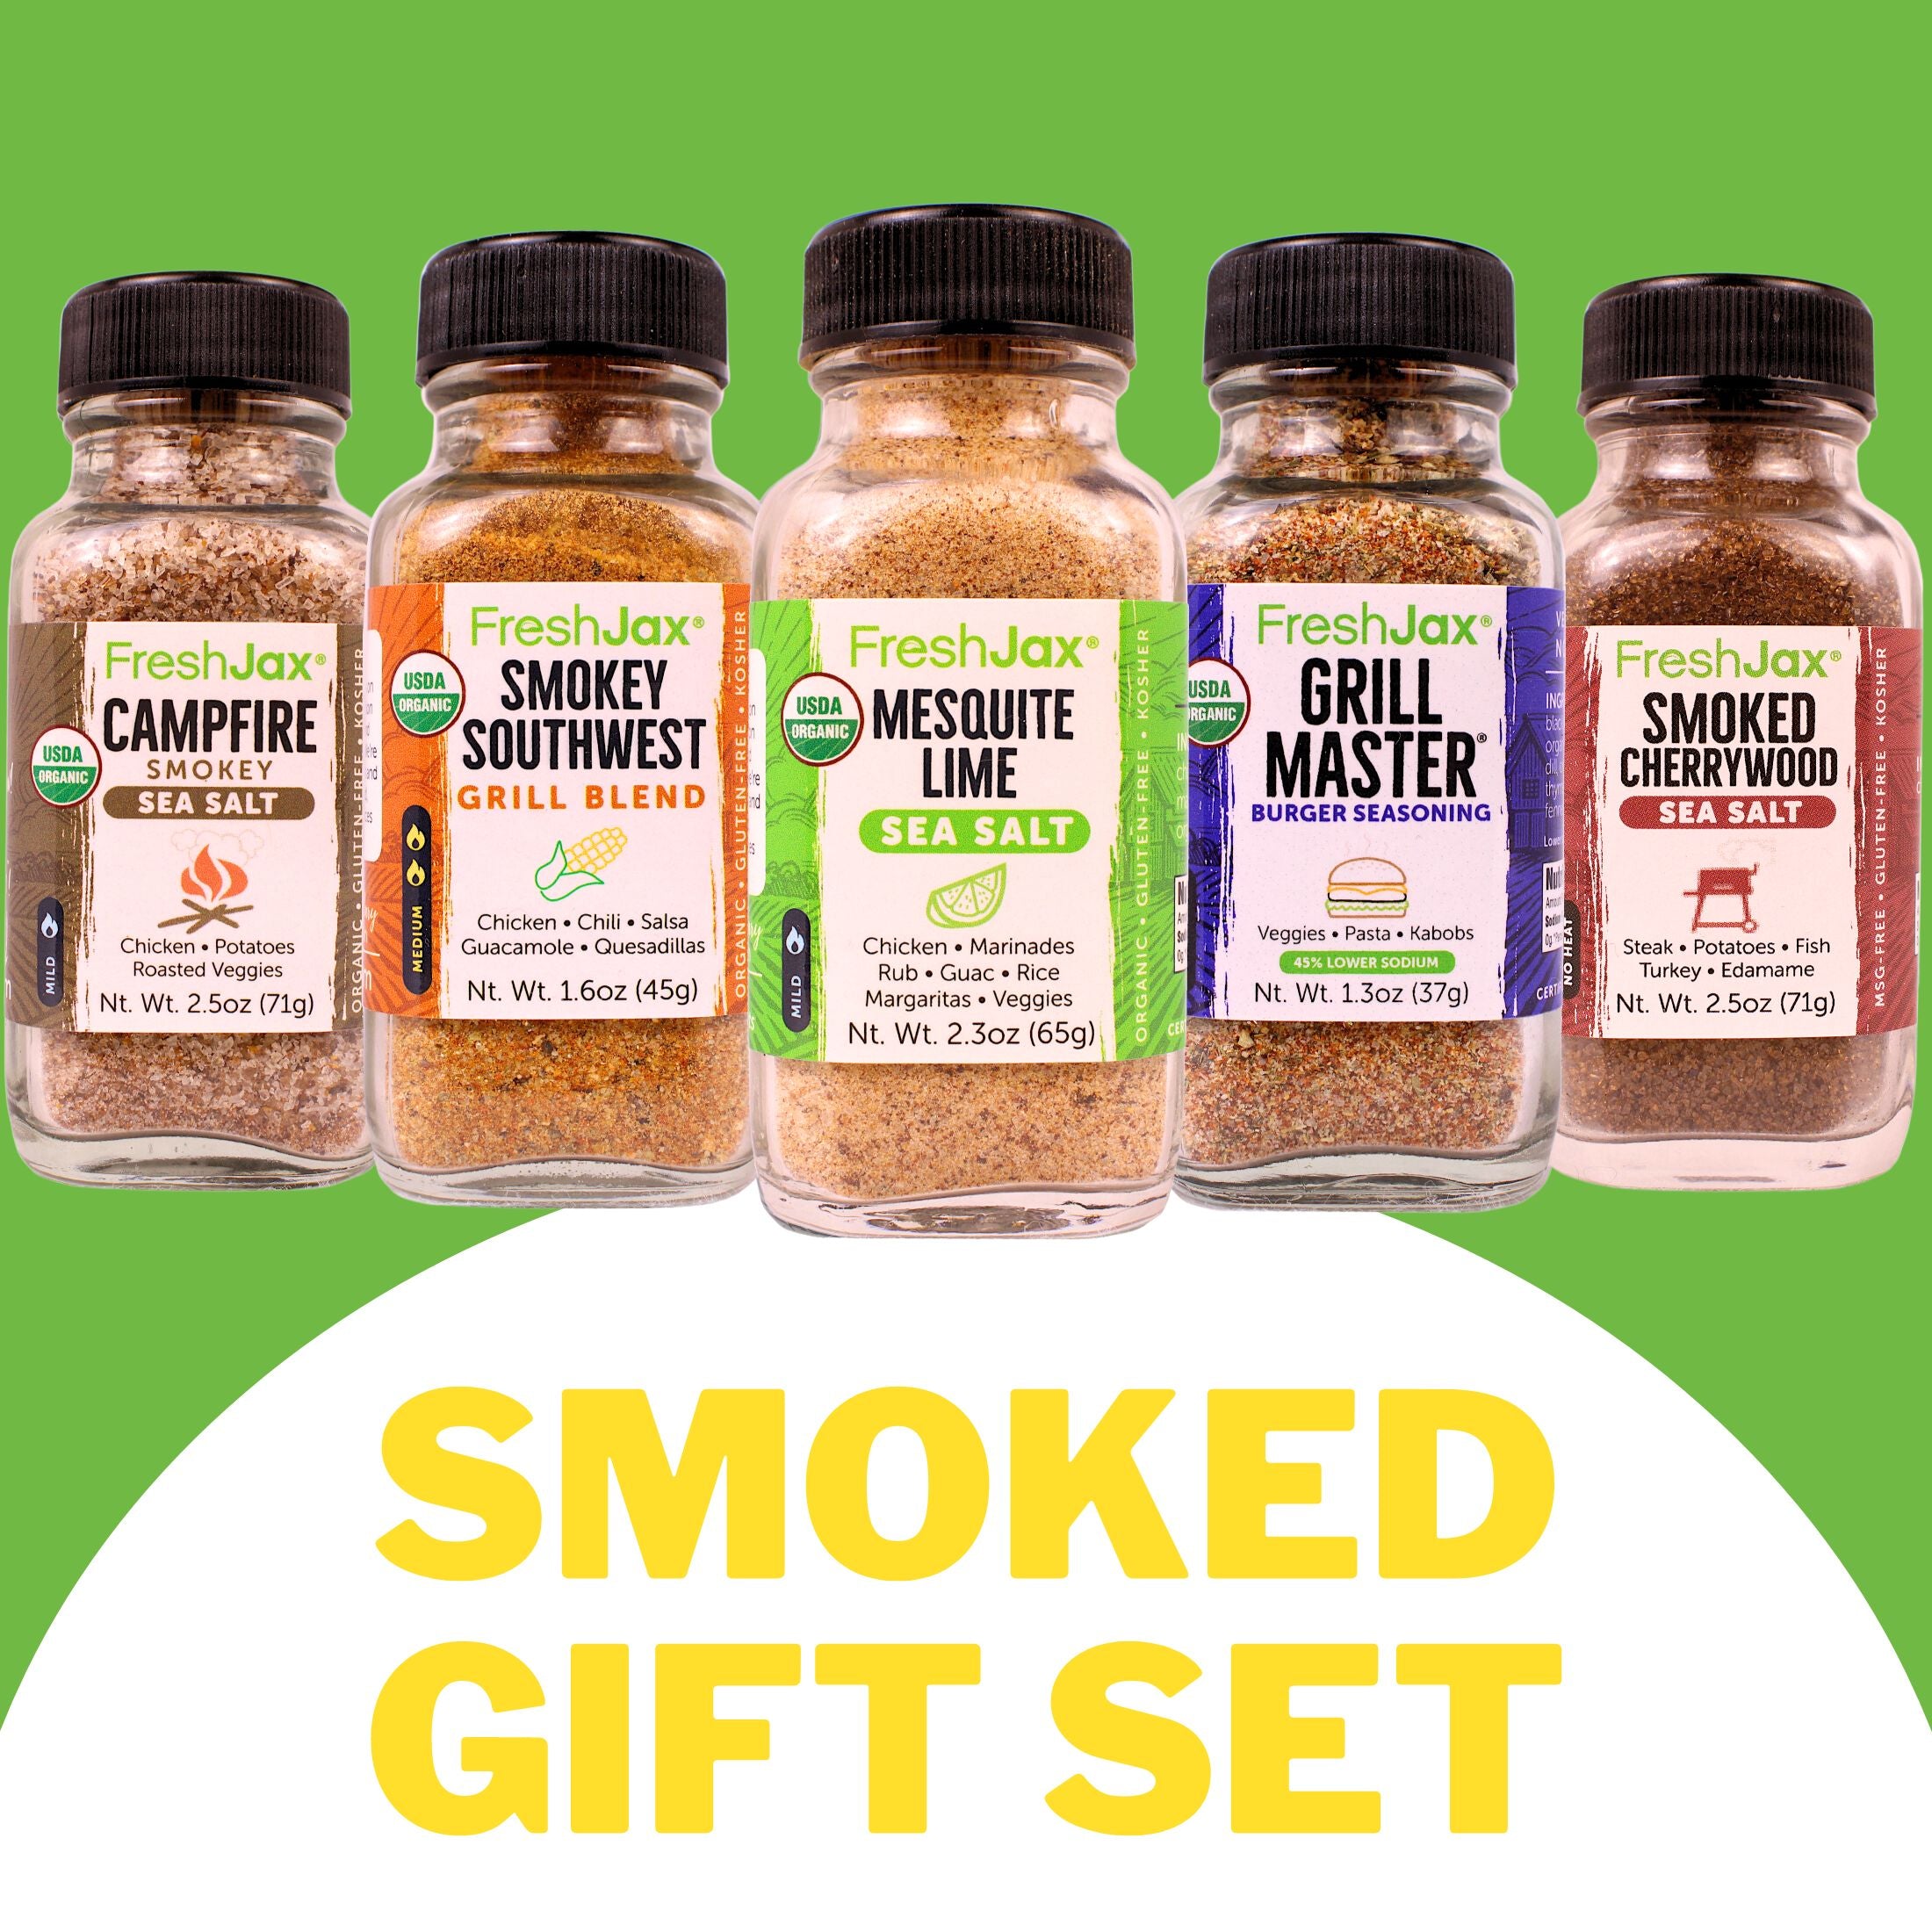 Badia Organic Spices and Seasonings Assorted Variety Sampler Set-(20 Count)